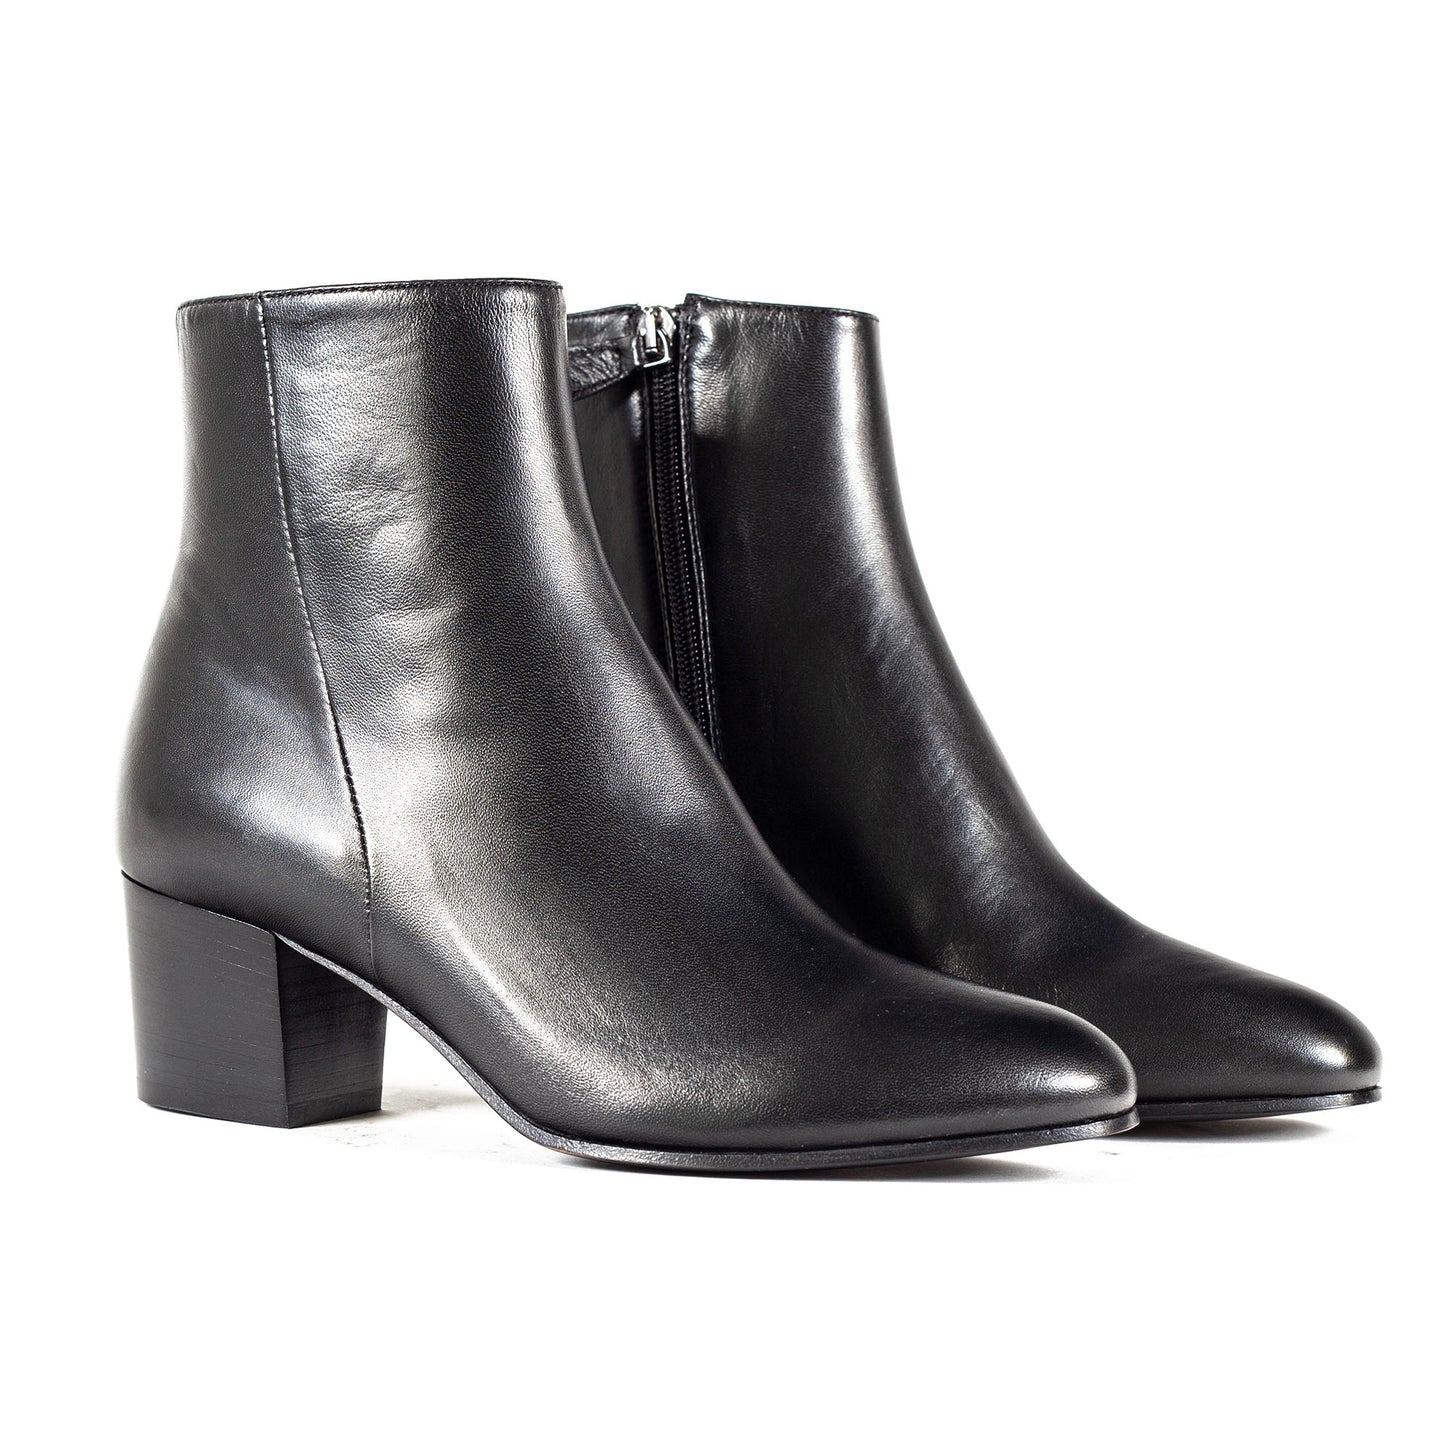 Triver - Ankle Boot